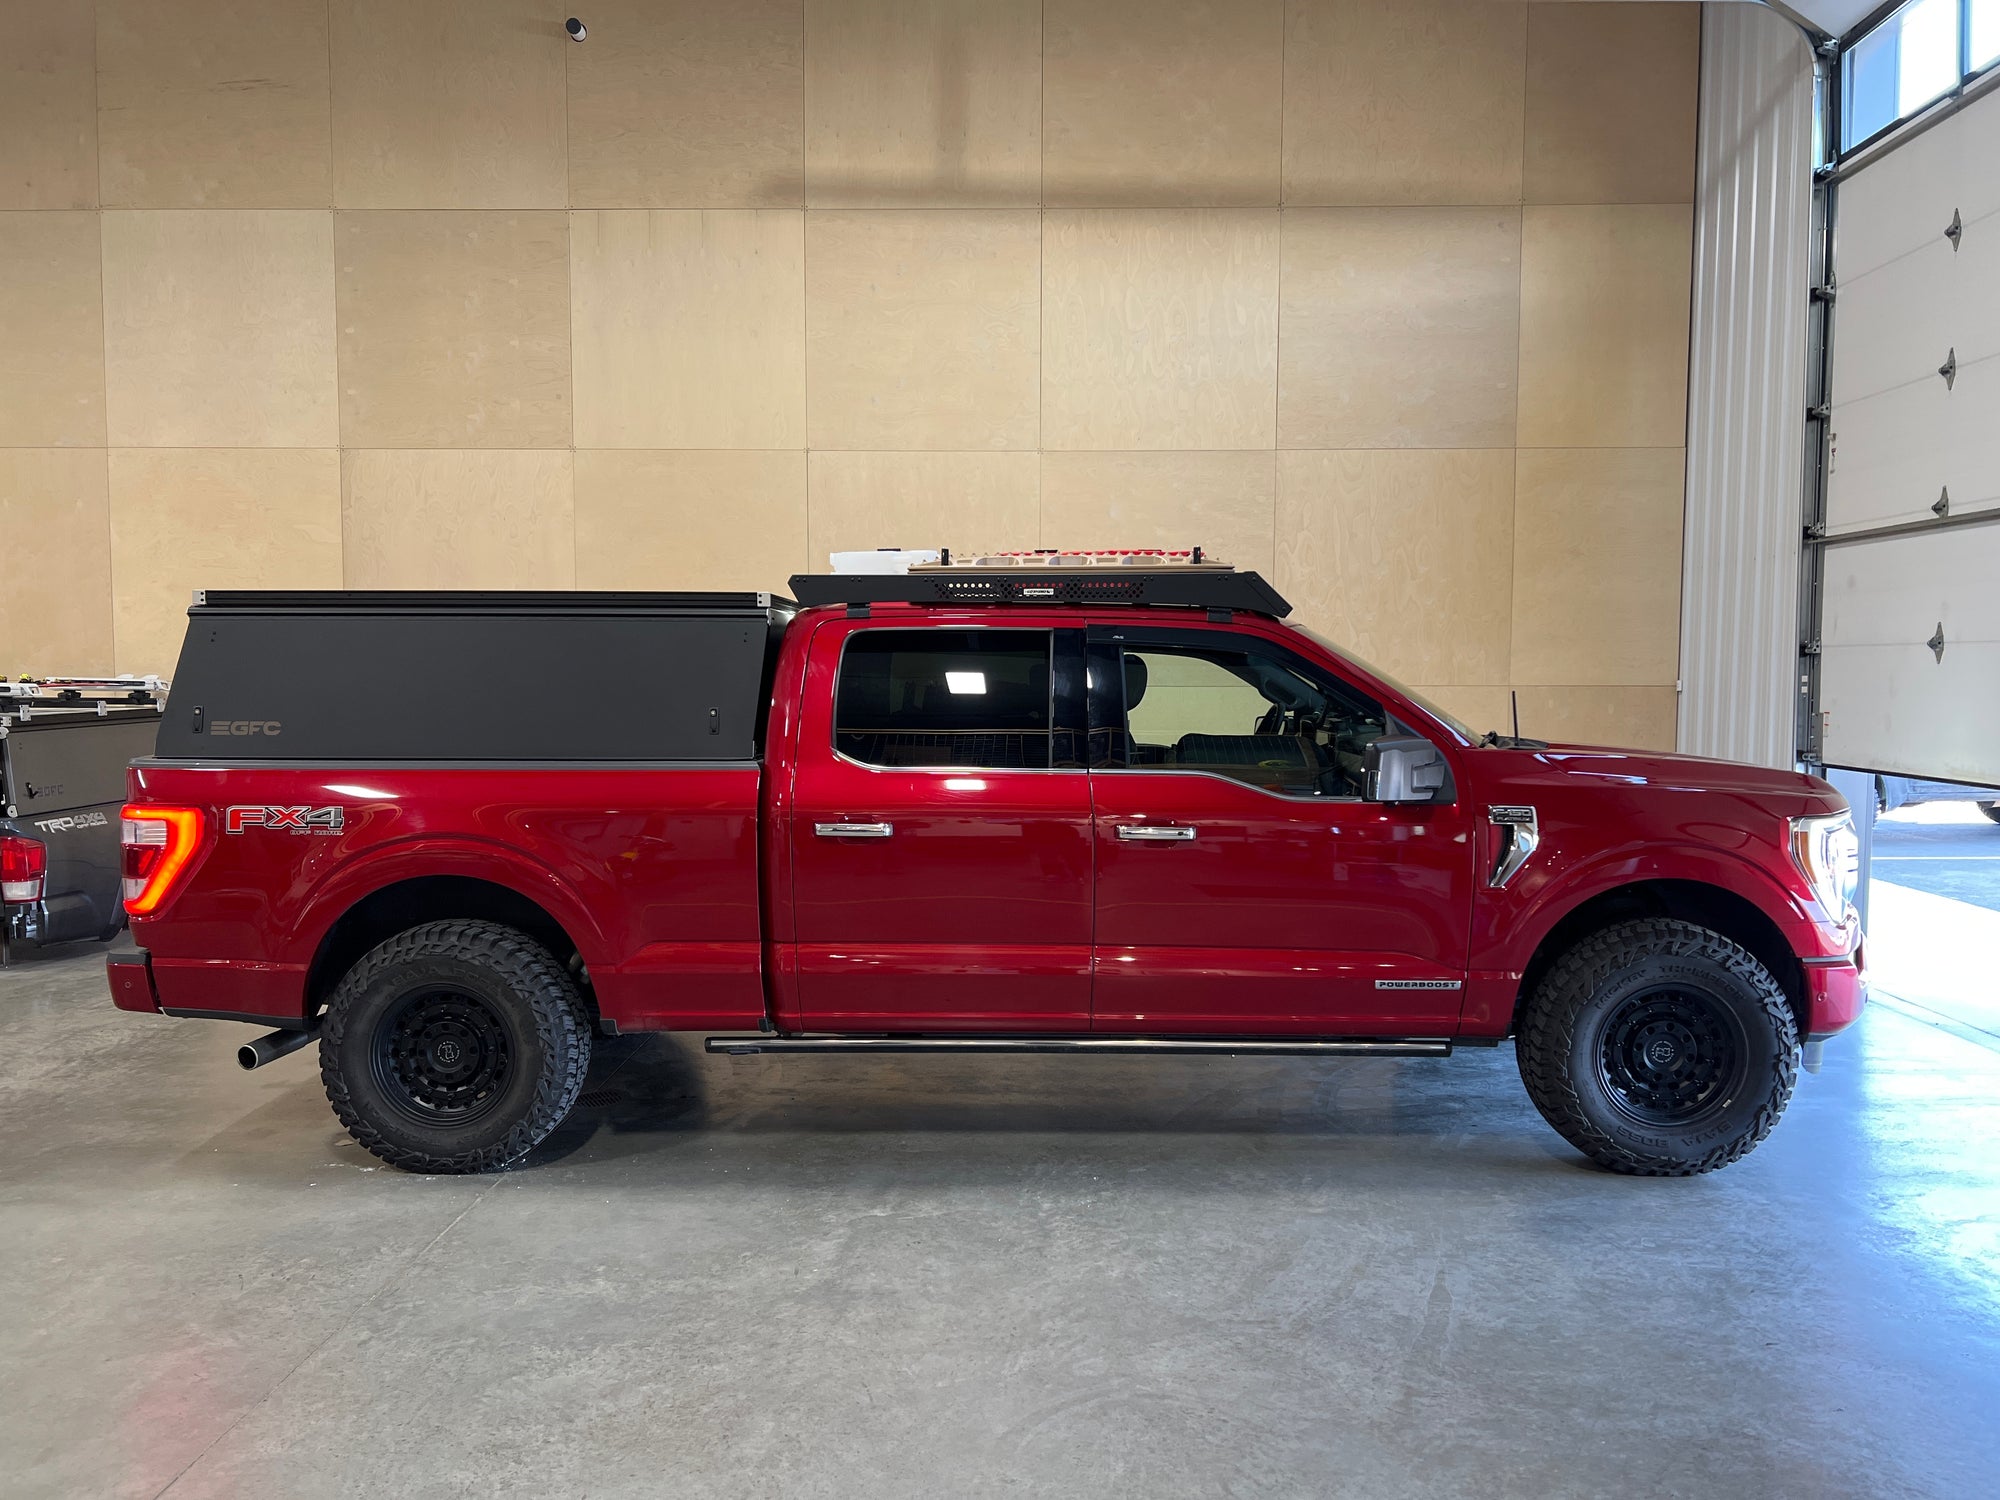 2022 Ford F150 Topper - Build #301